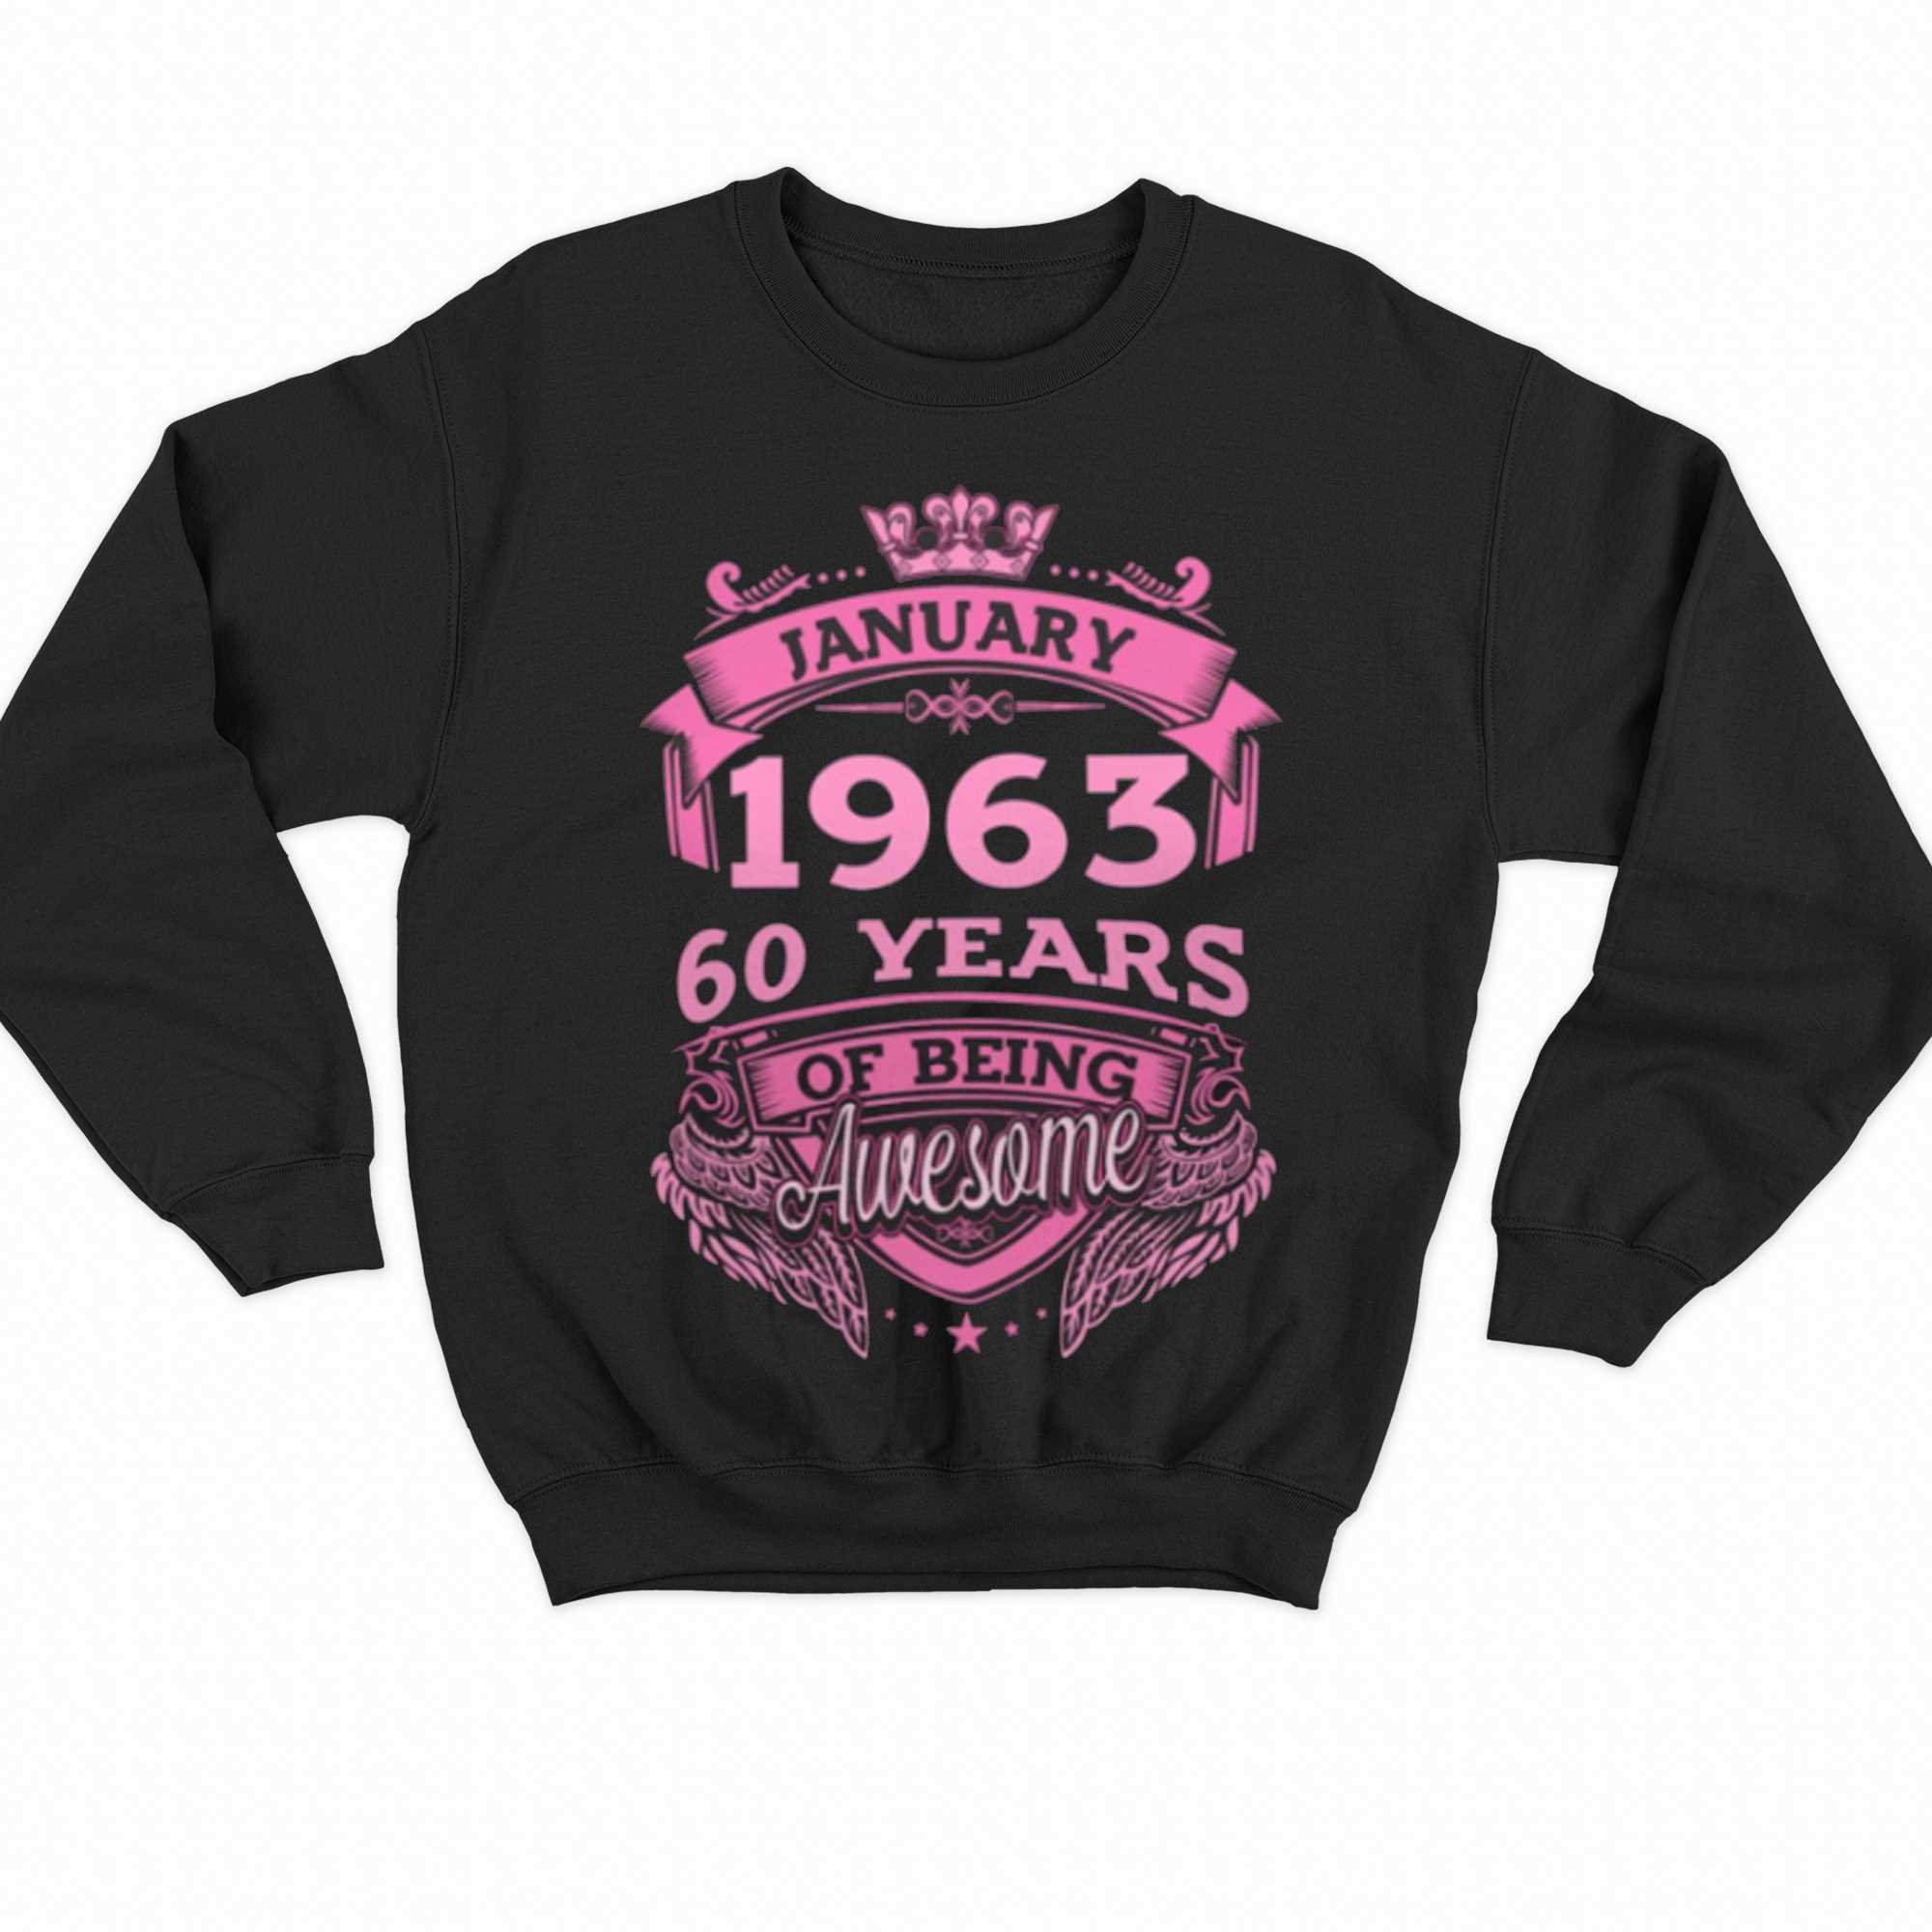 January 1963 60 Years Of Being Awesome Shirt 